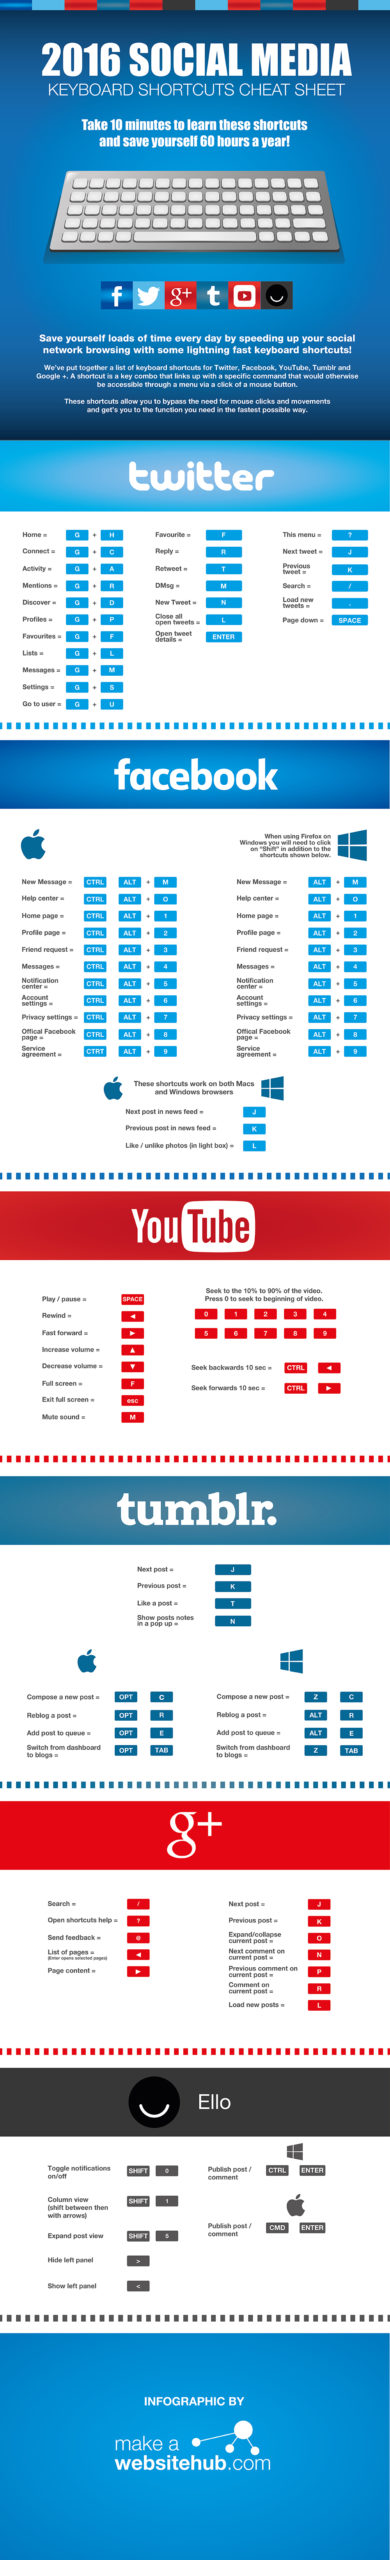 Clever Keyboard Shortcuts For Facebook, Twitter, YouTube And More [Infographic]